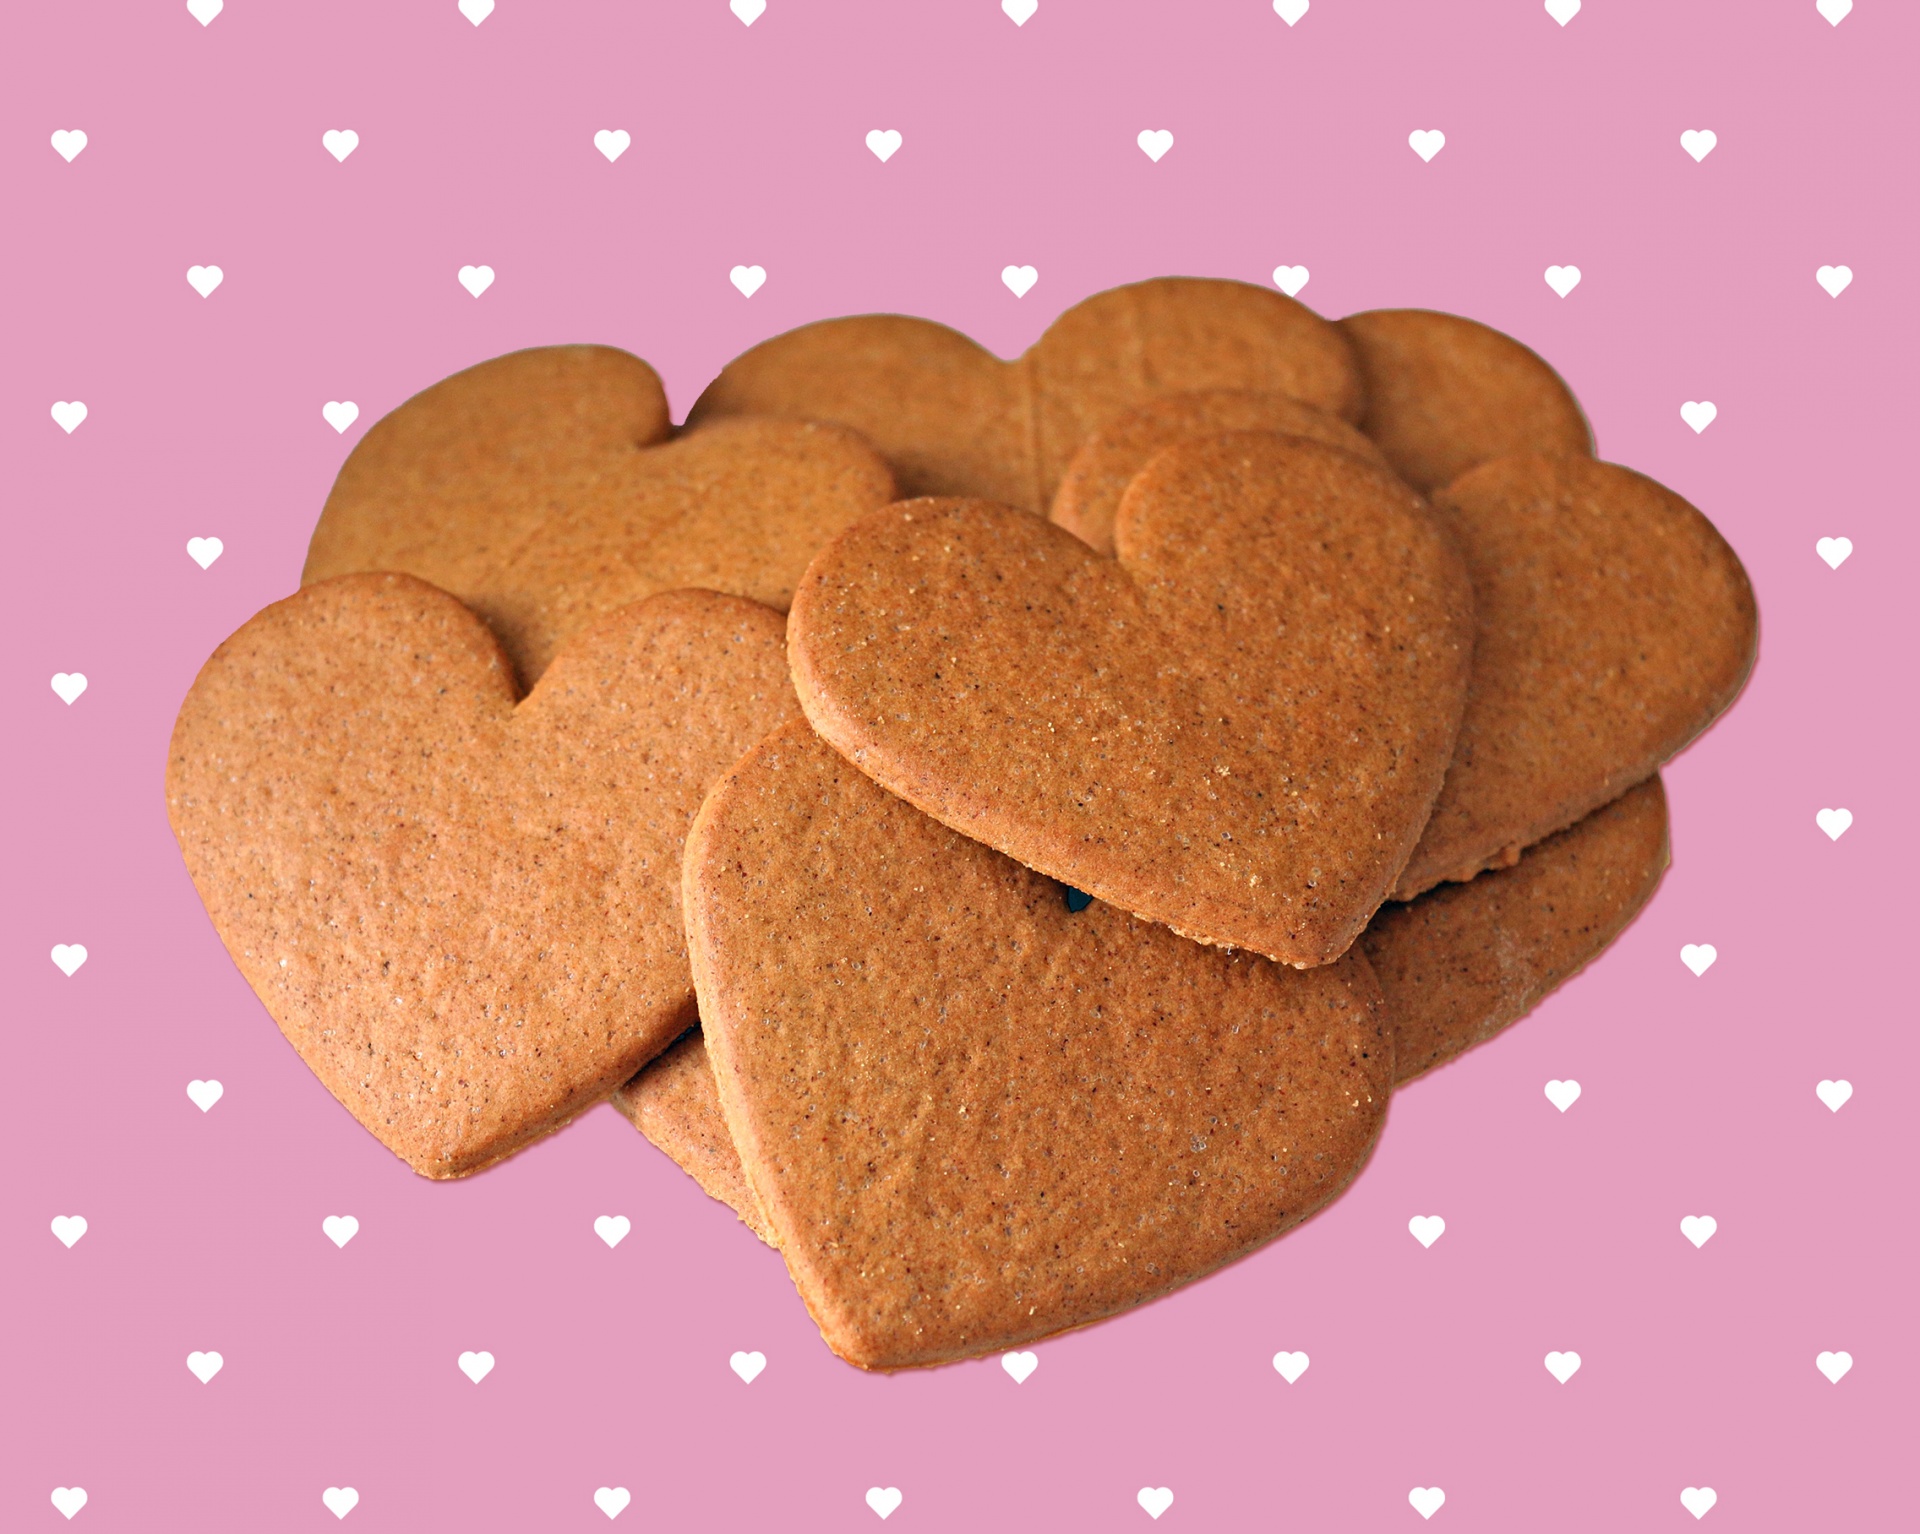 Cookies, Biscuits, Heart Shaped